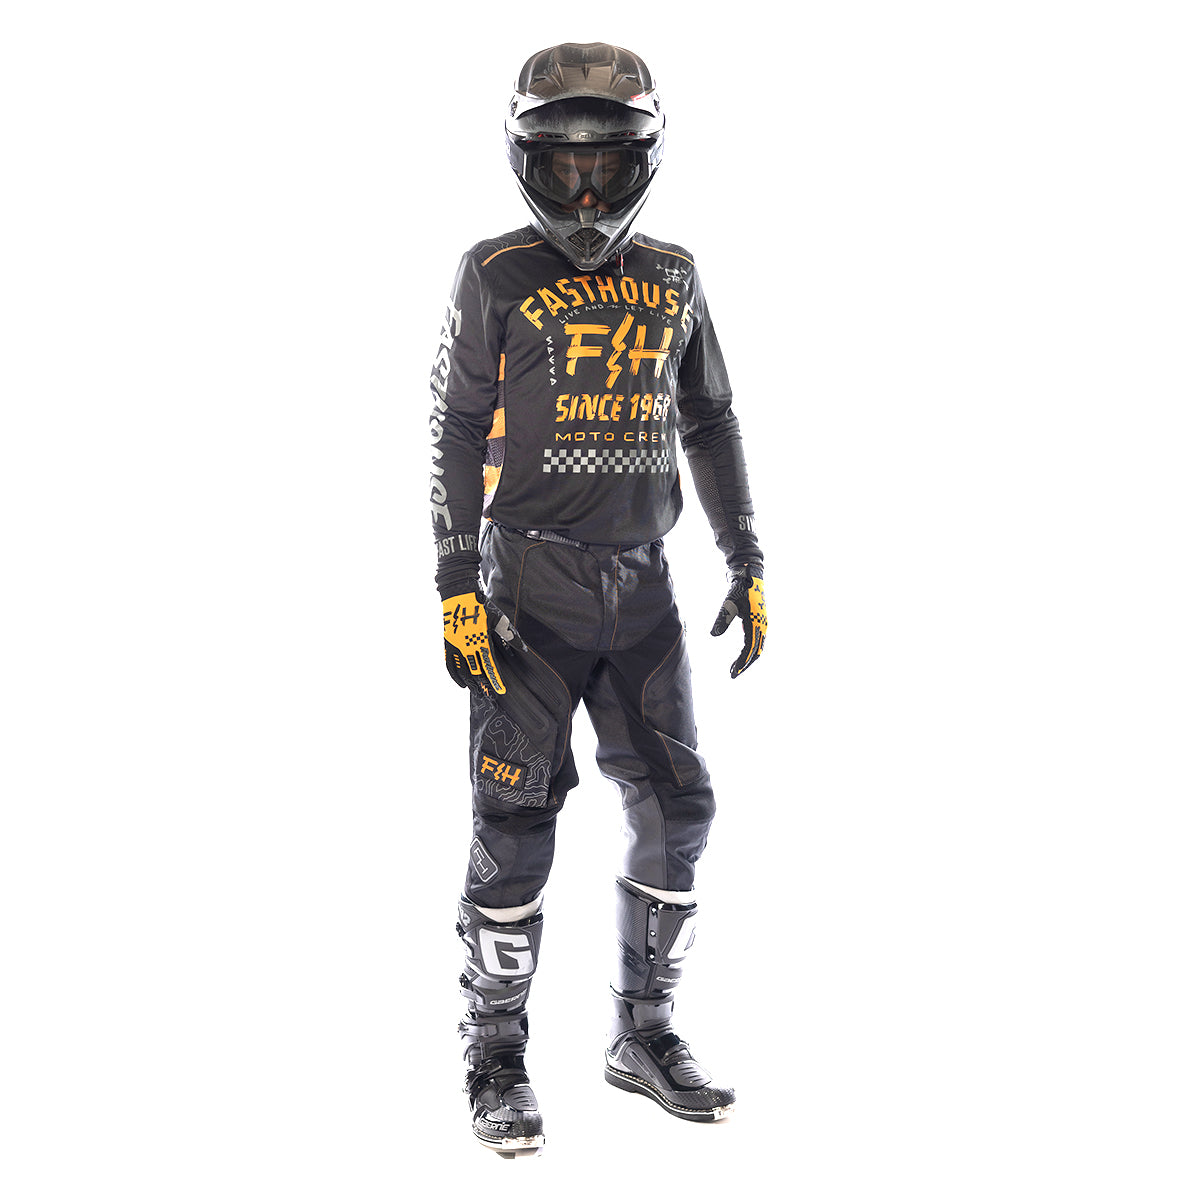 Off-Road Jersey - Black/Amber